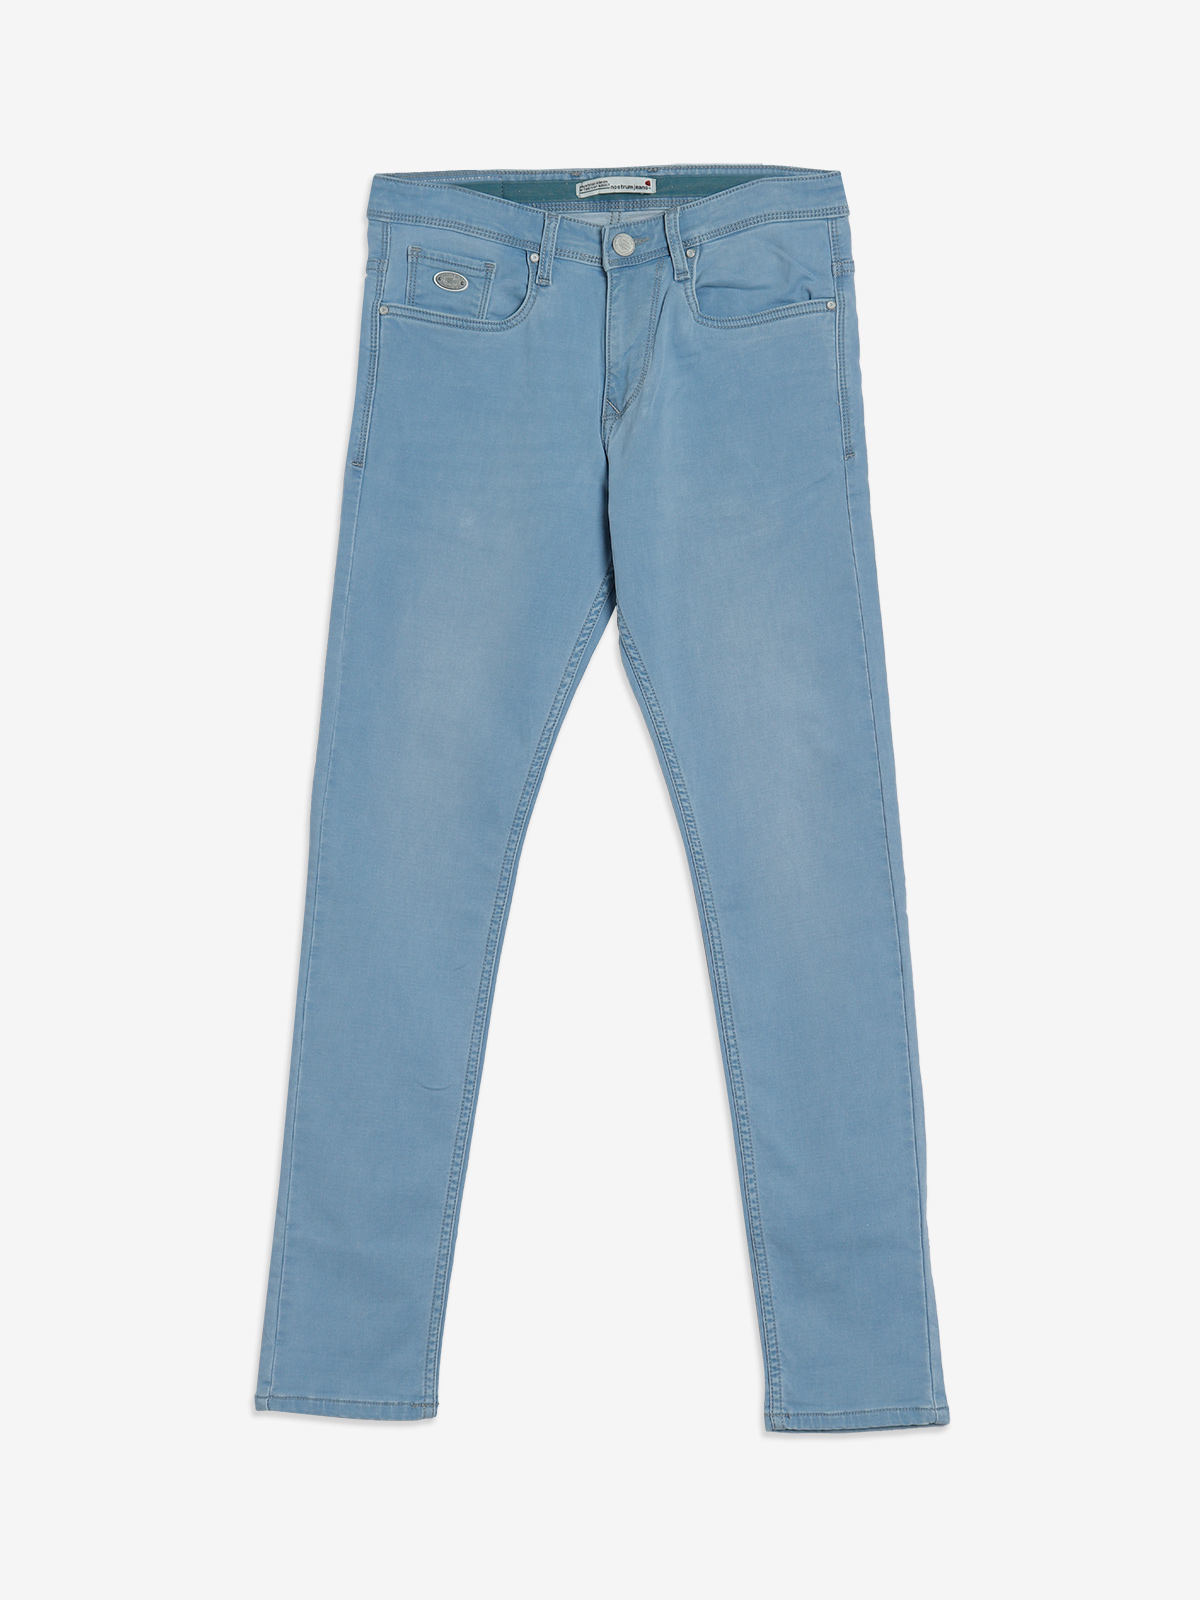 Slim Fit Light Blue Colour Jeans – Dilutee India